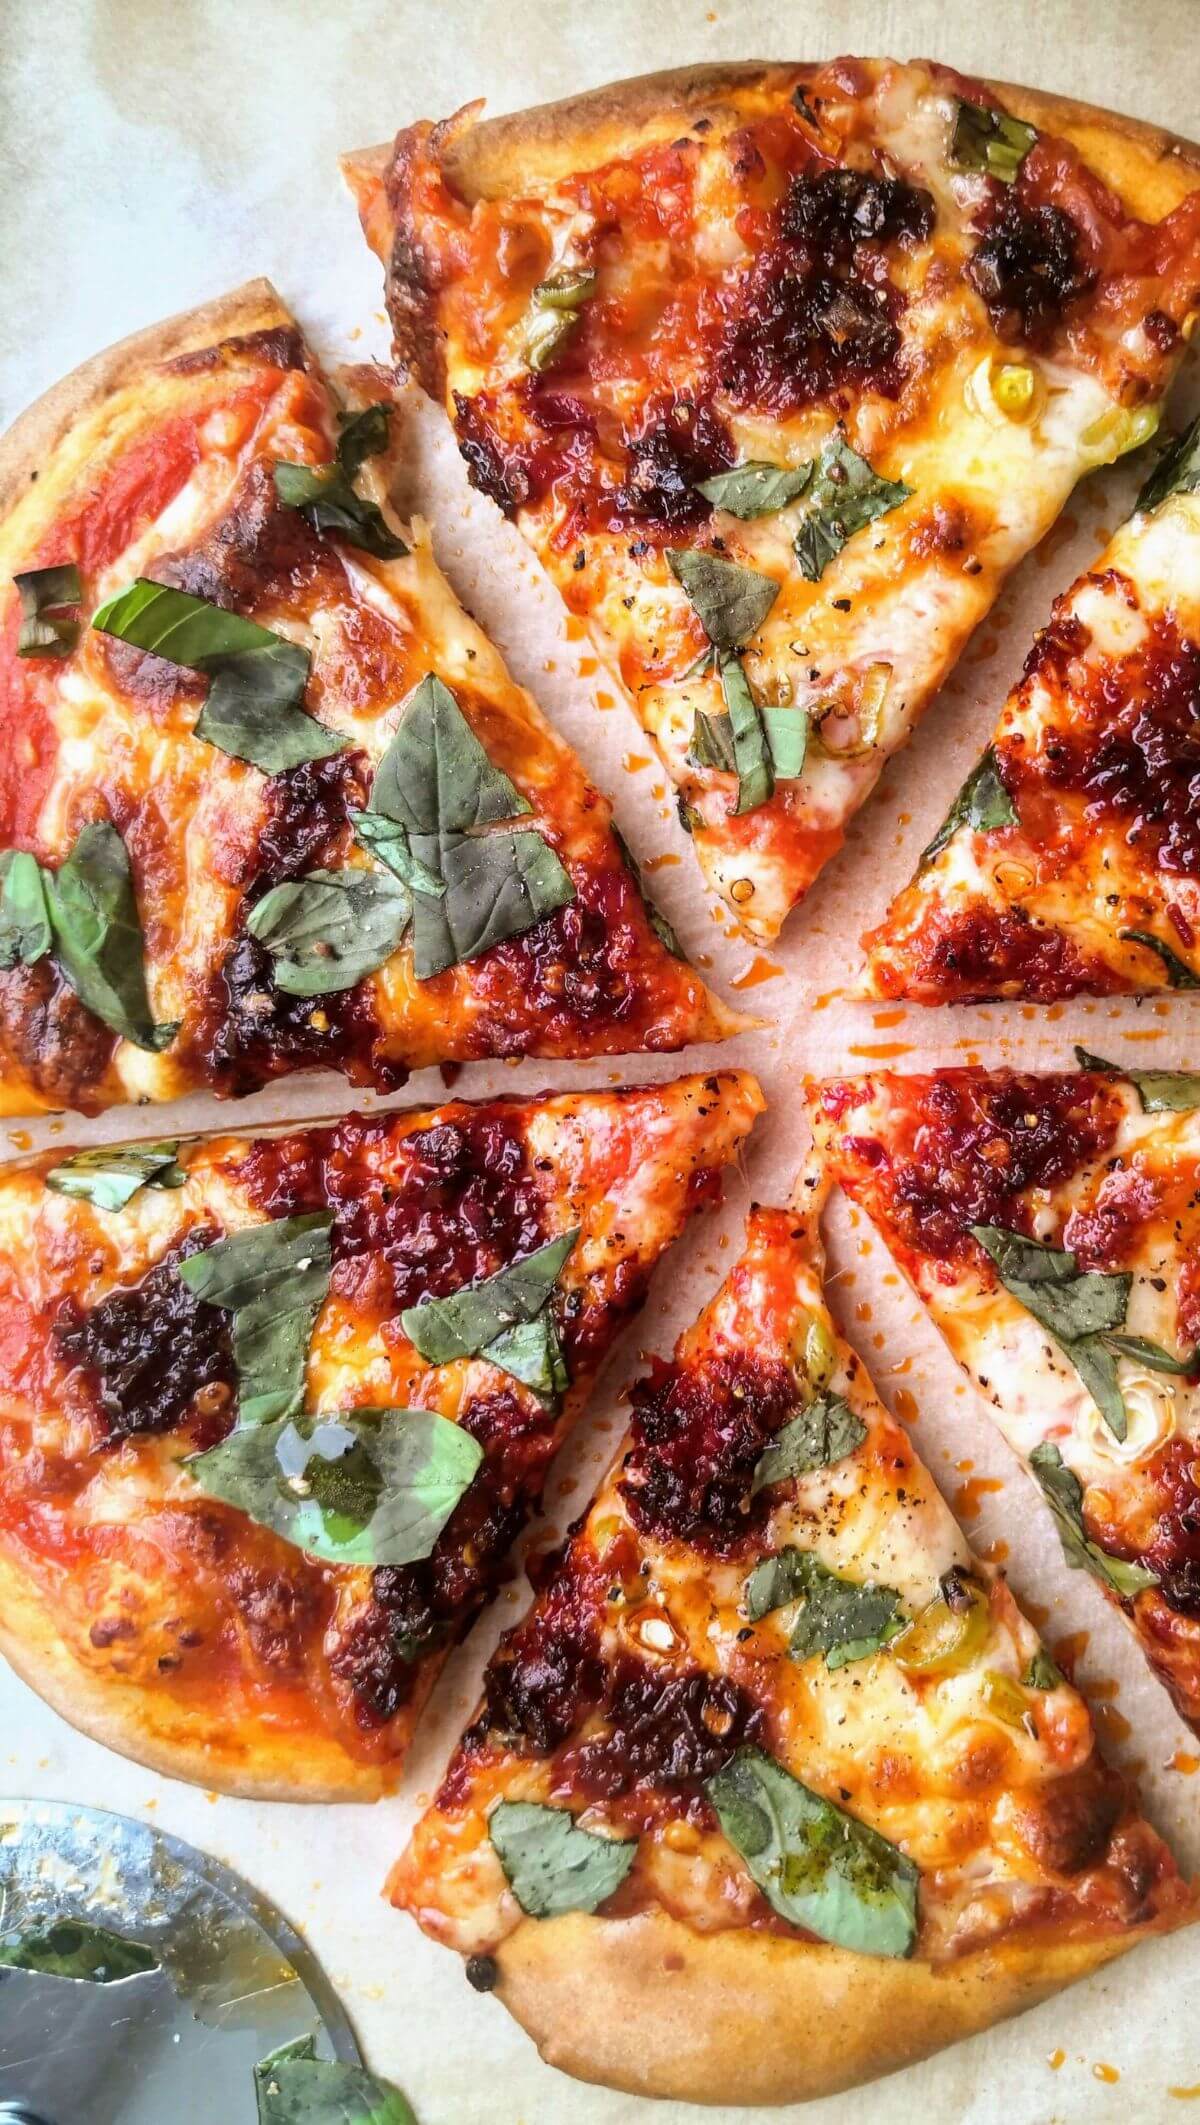 5 Tips For Making the Best Pizza at Home